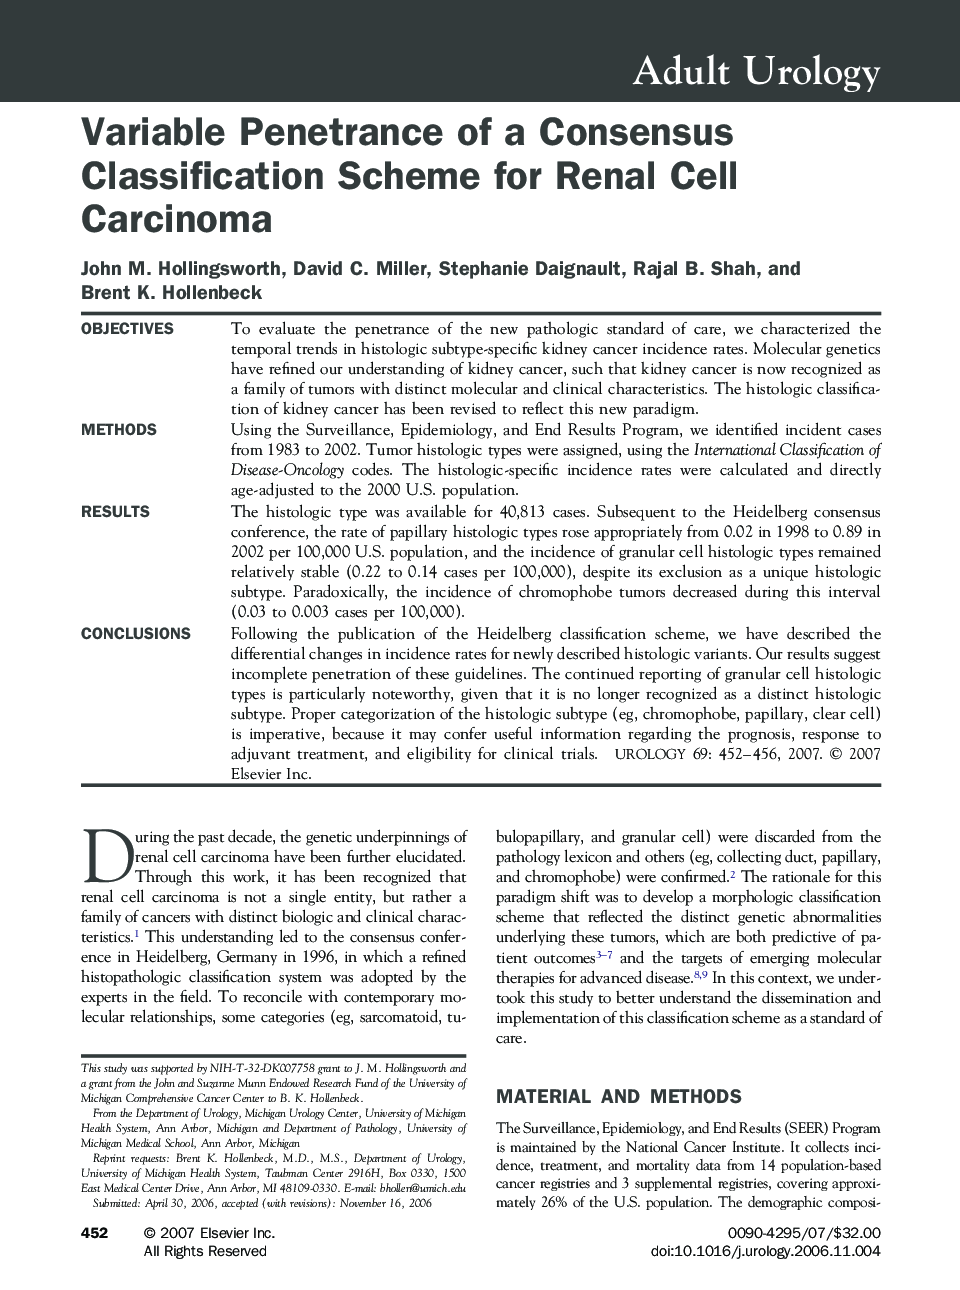 Variable Penetrance of a Consensus Classification Scheme for Renal Cell Carcinoma